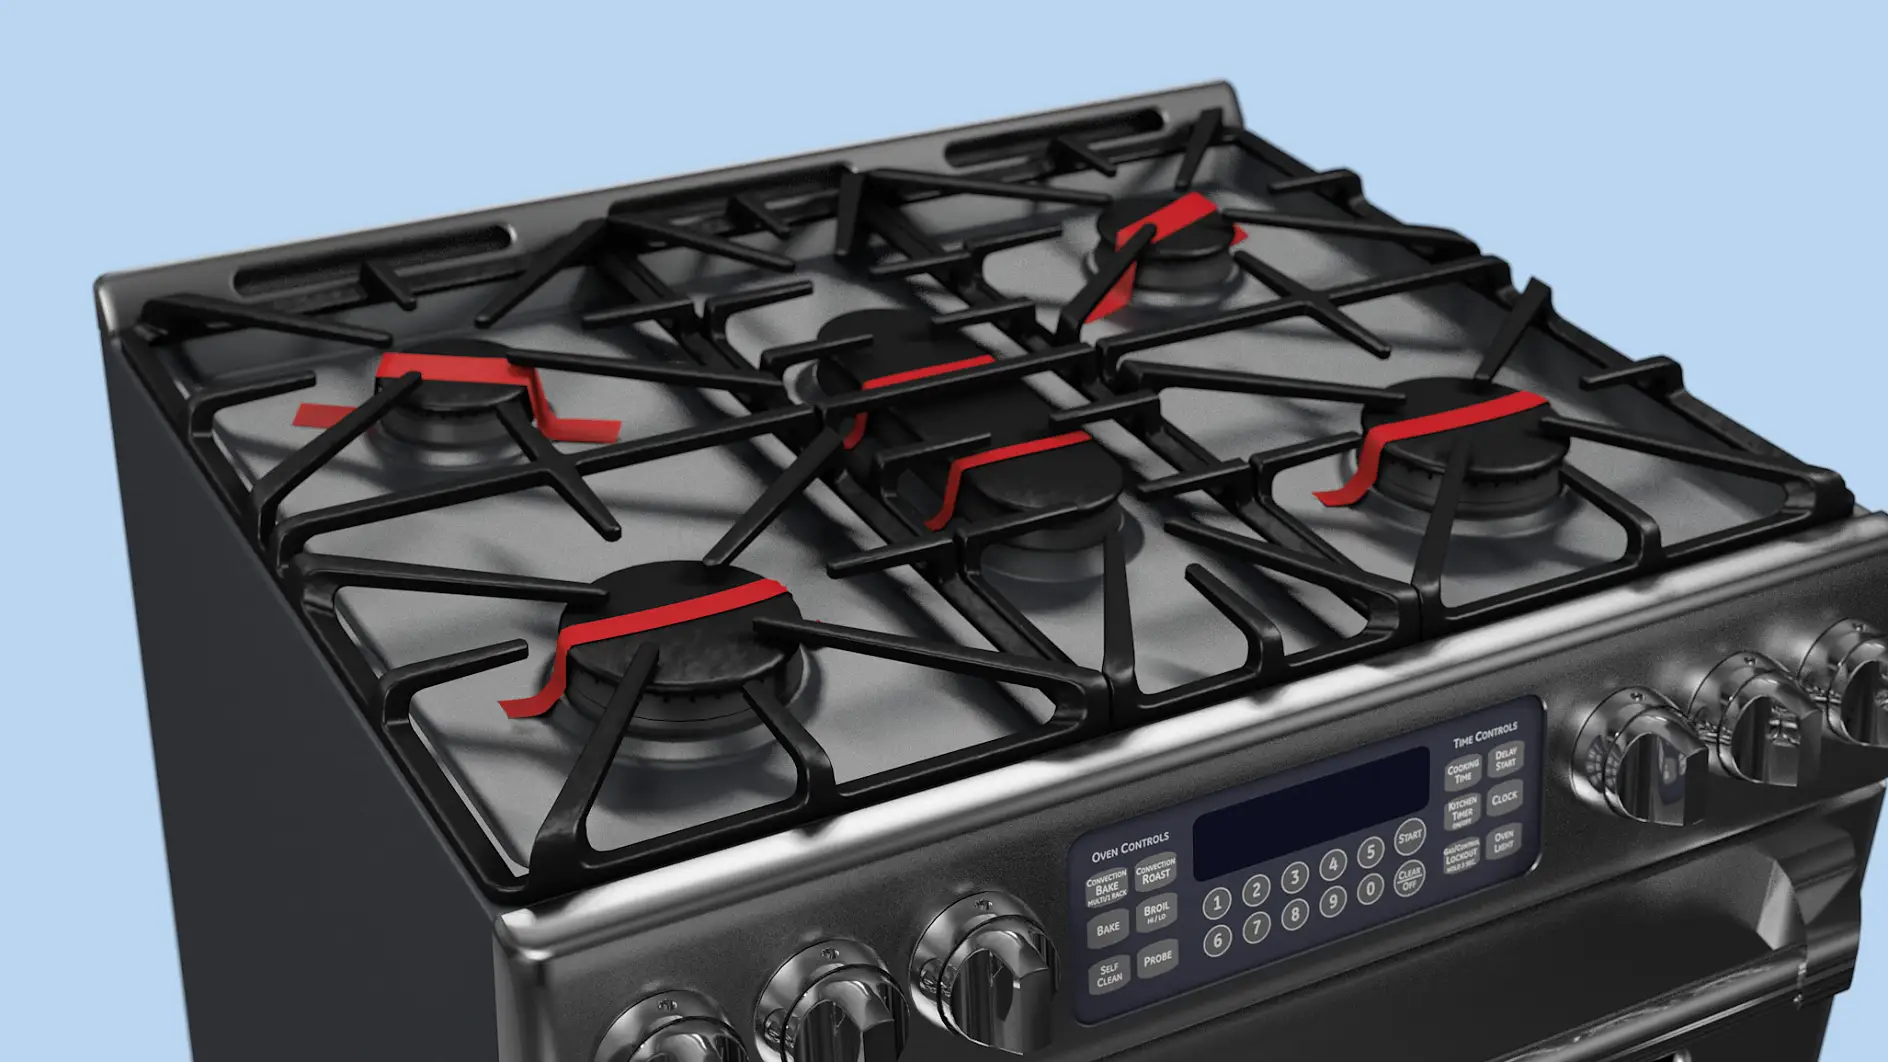 During transport the metal cooktop is kept in place by using adhesive tape.